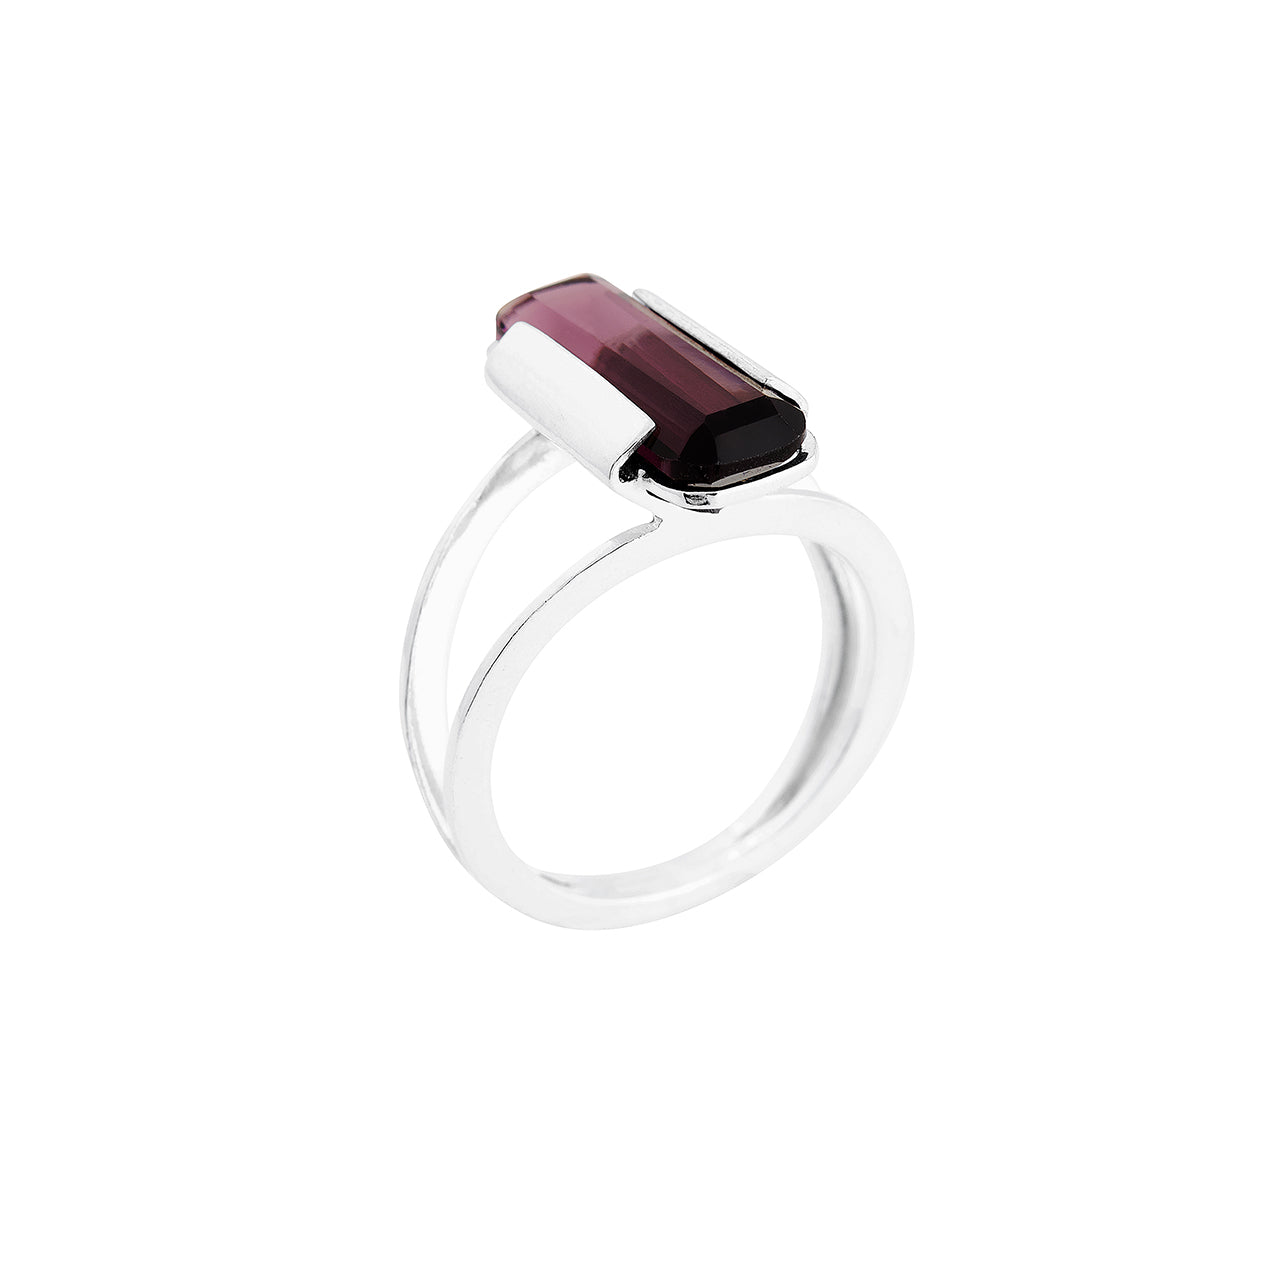 silver apex ring with vintage purple stone